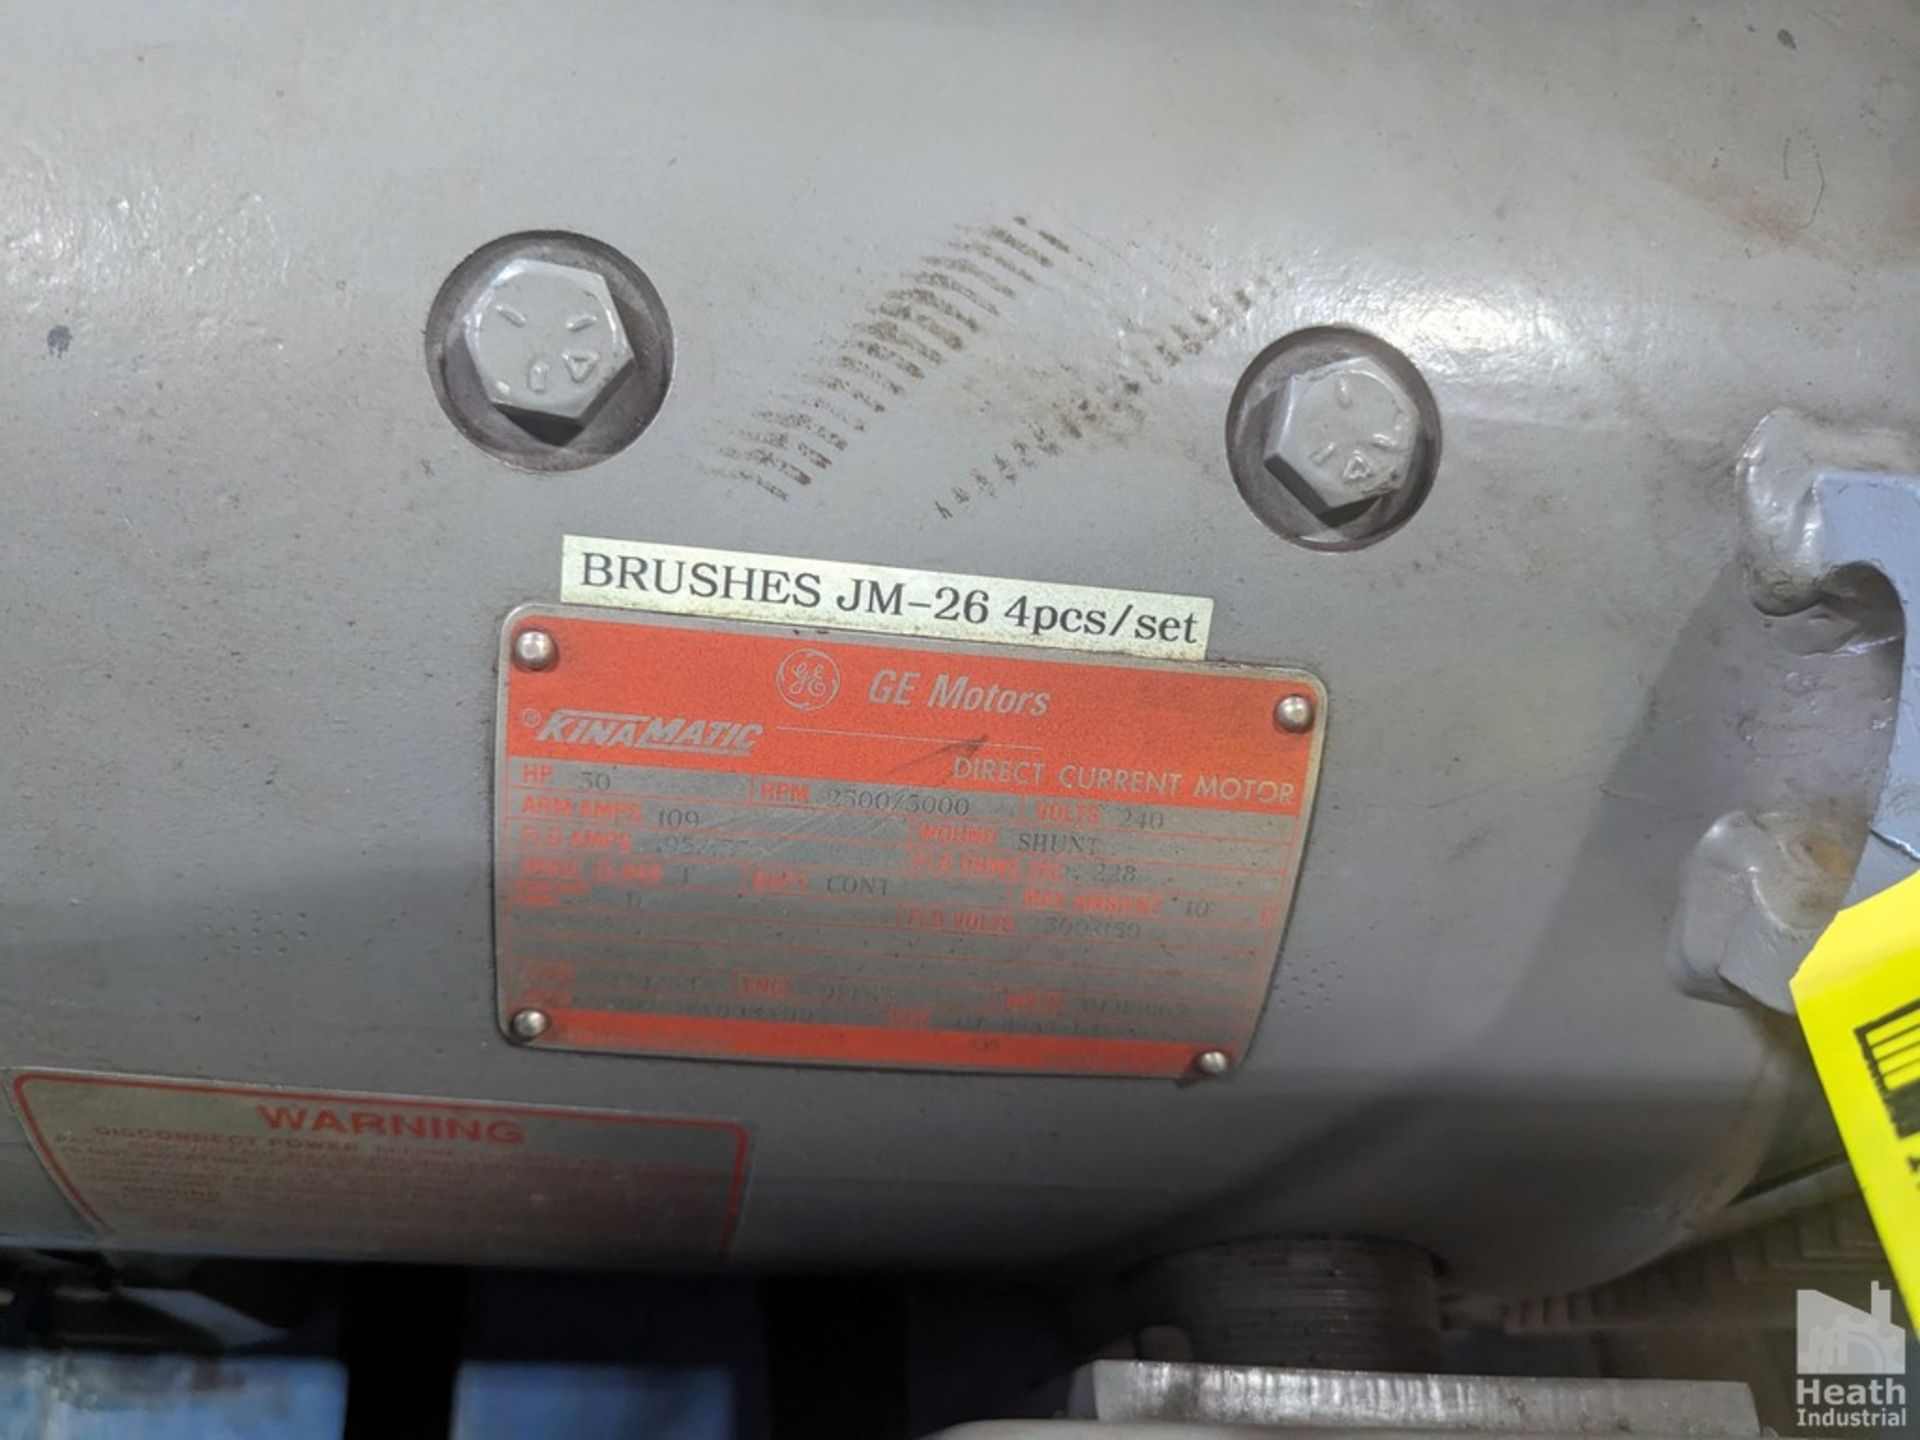 GENERAL ELECTRIC TYPE CD287AT DIRECT CURRENT MOTOR, 30HP, 240 VOLTS, 2500/3000 RPM - Image 2 of 2